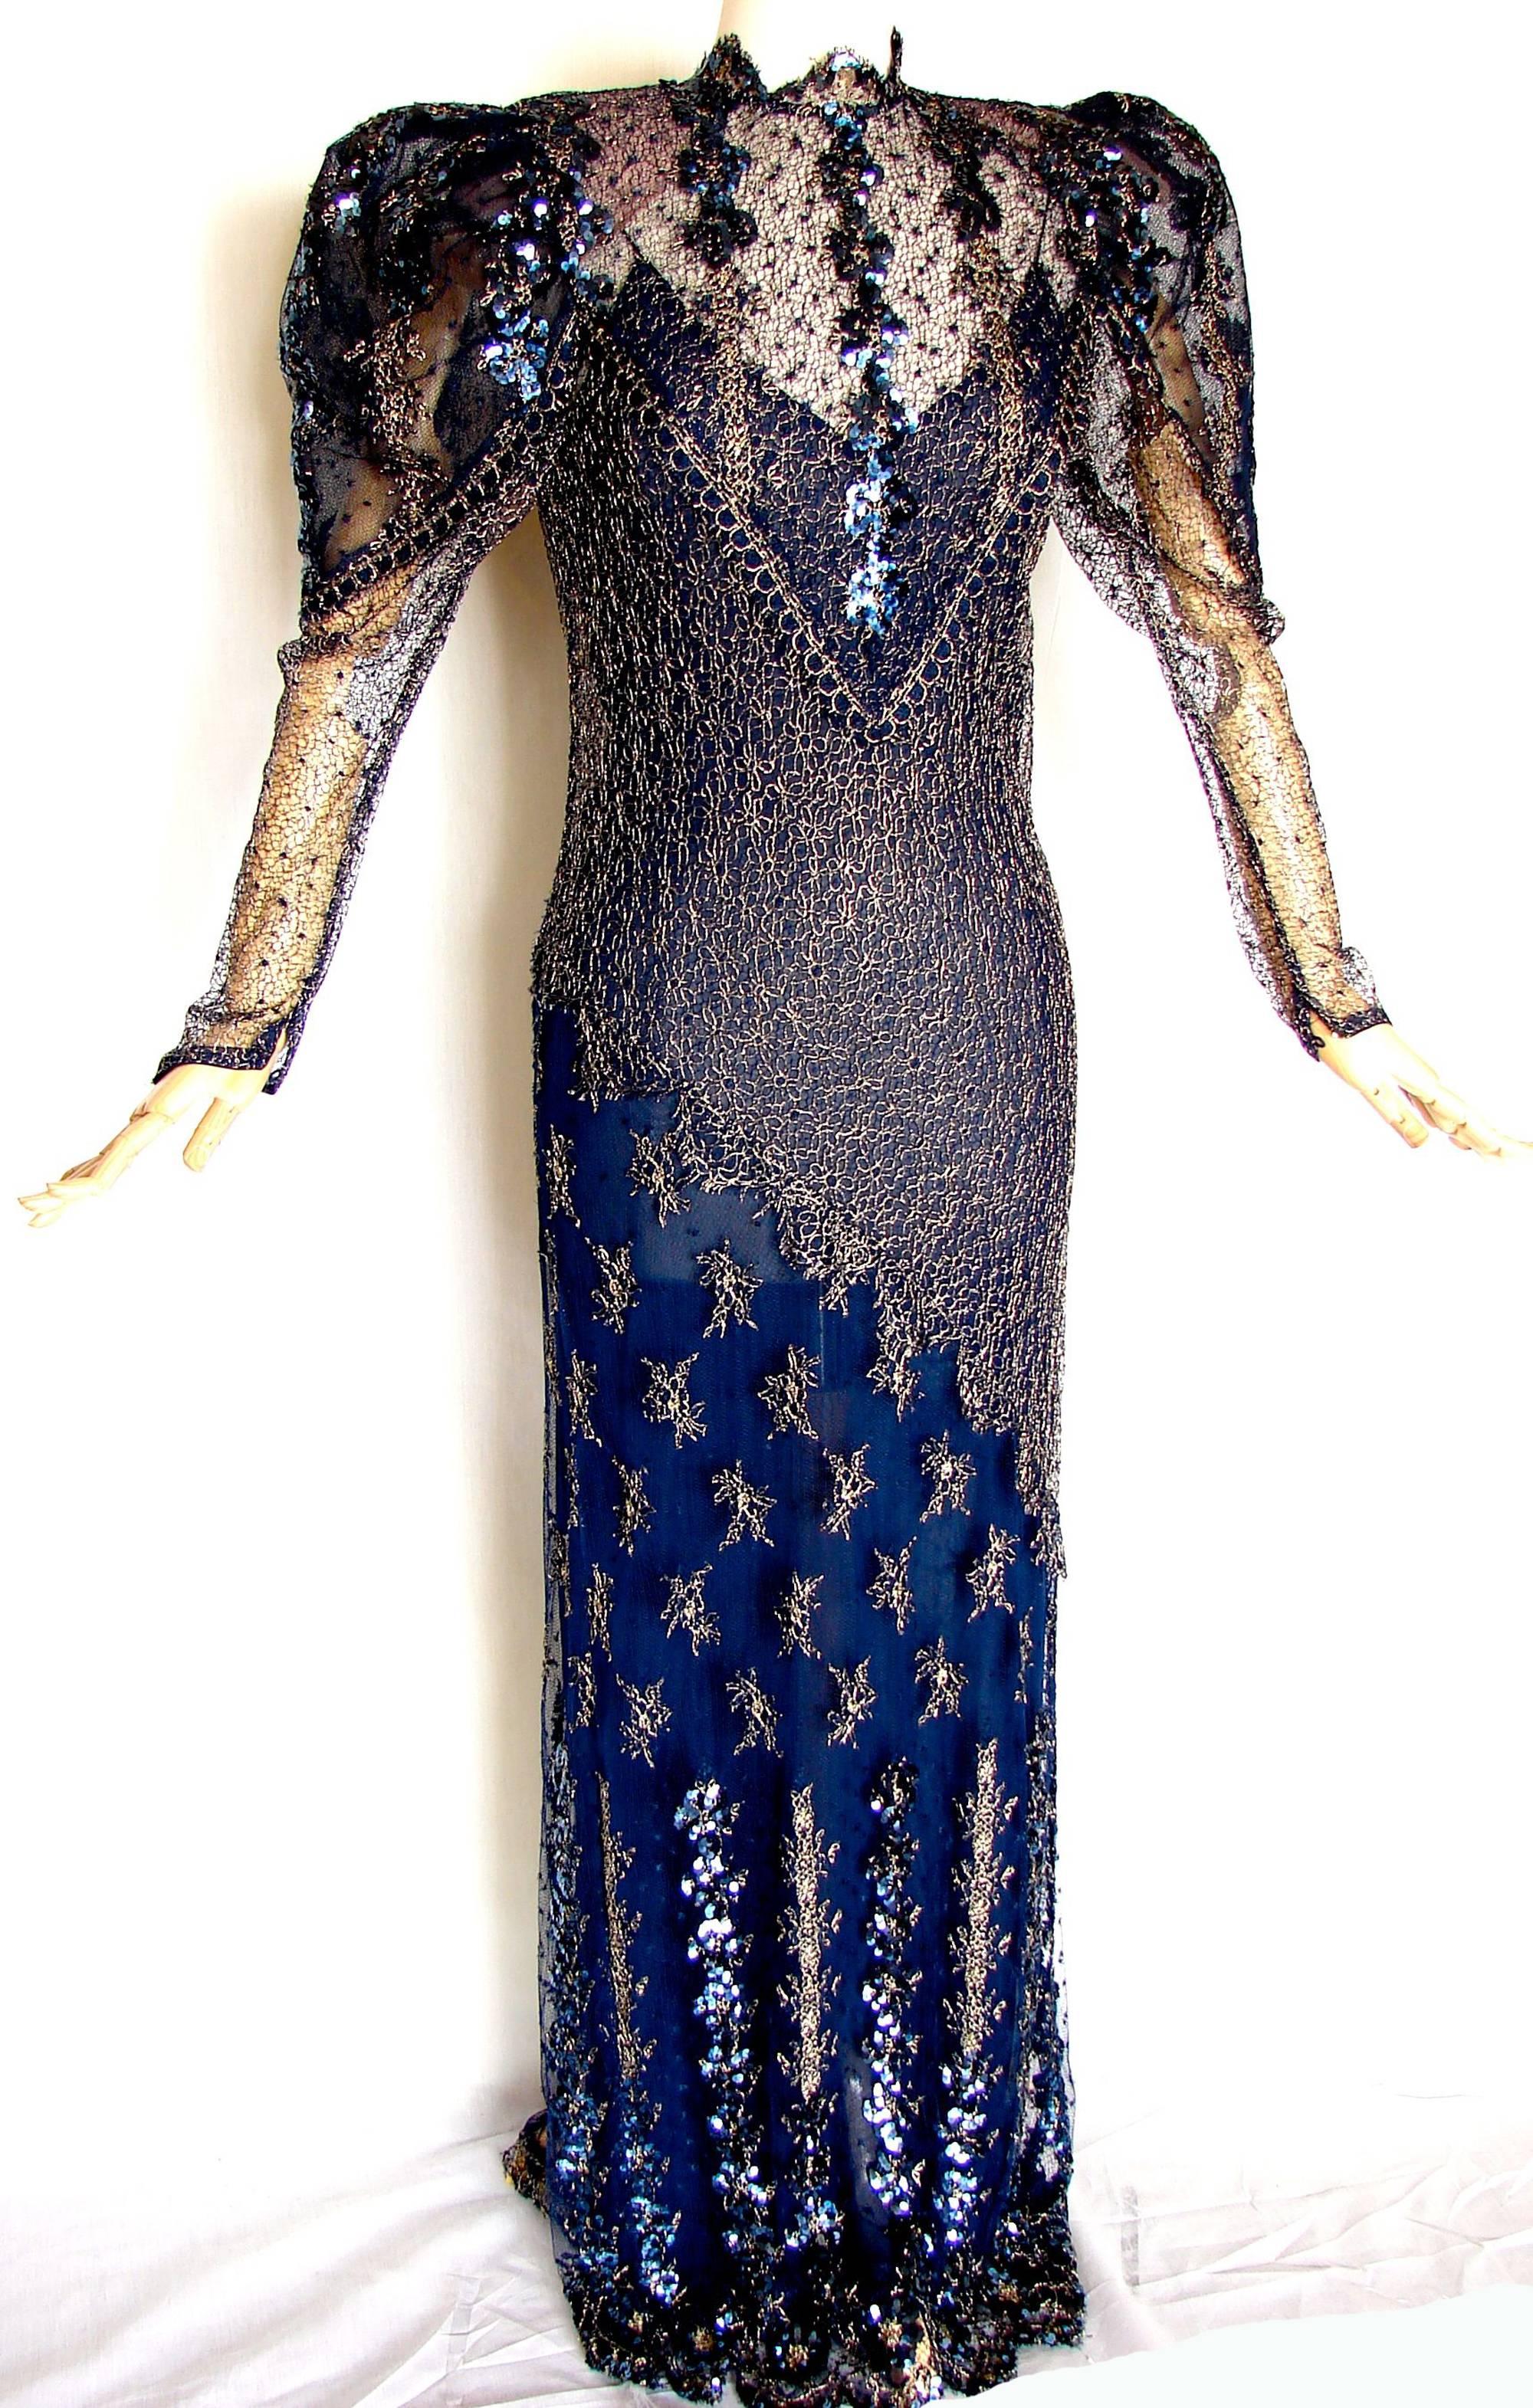 This lovely evening dress features two pieces: a navy slip dress and an incredible over dress made from lace, sequins and gold metallic embroidery.  With its Gigot sleeves and rear train, it definitely gives off a vibe of royalty!
In excellent